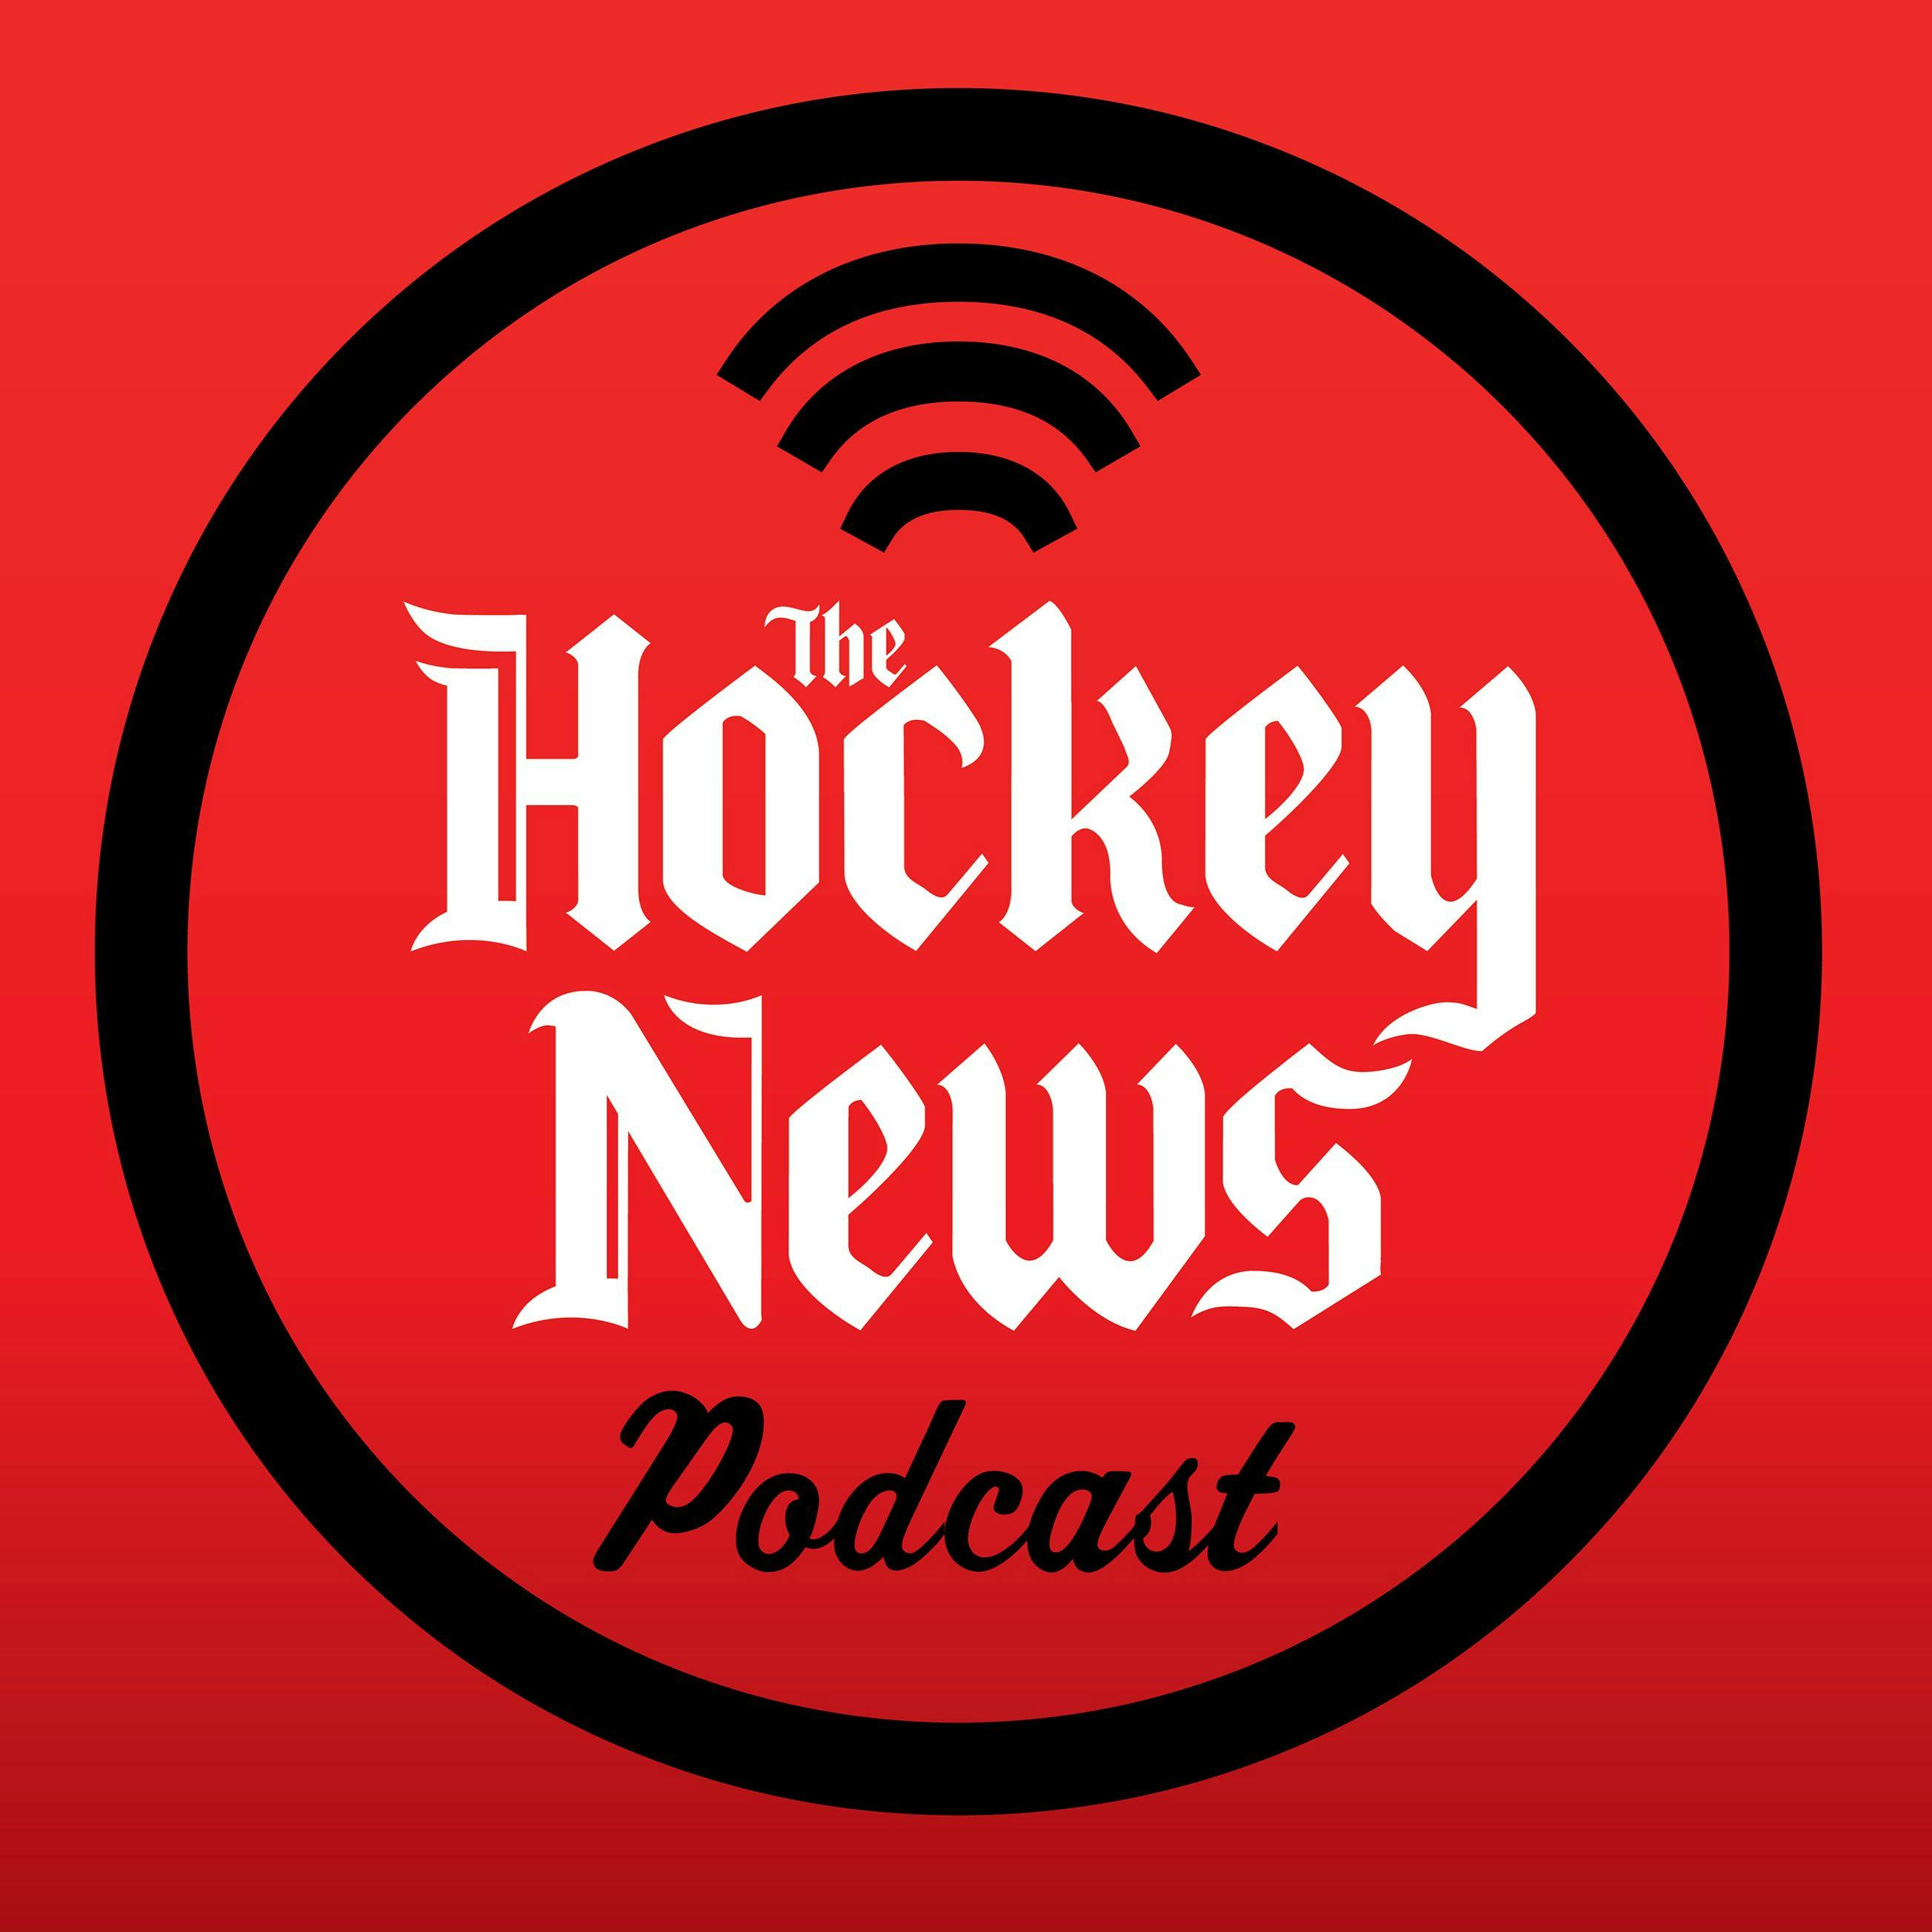 The Hockey News Podcast: Which NHL Teams Are Legit or Worrisome?